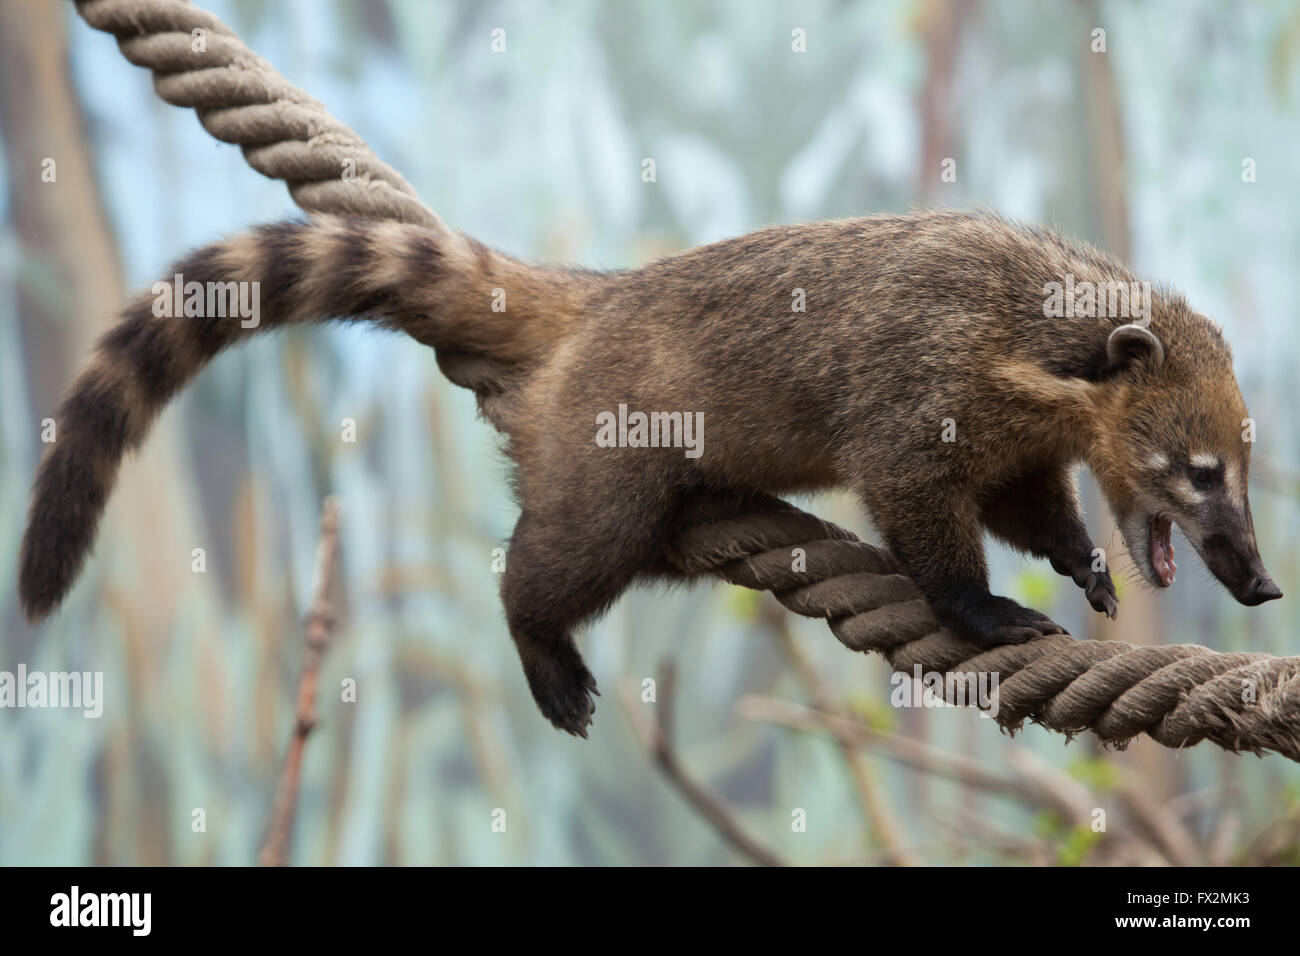 South American coati (Nasua nasua), also known as the ring-tailed coati at Budapest Zoo in Budapest, Hungary. Stock Photo